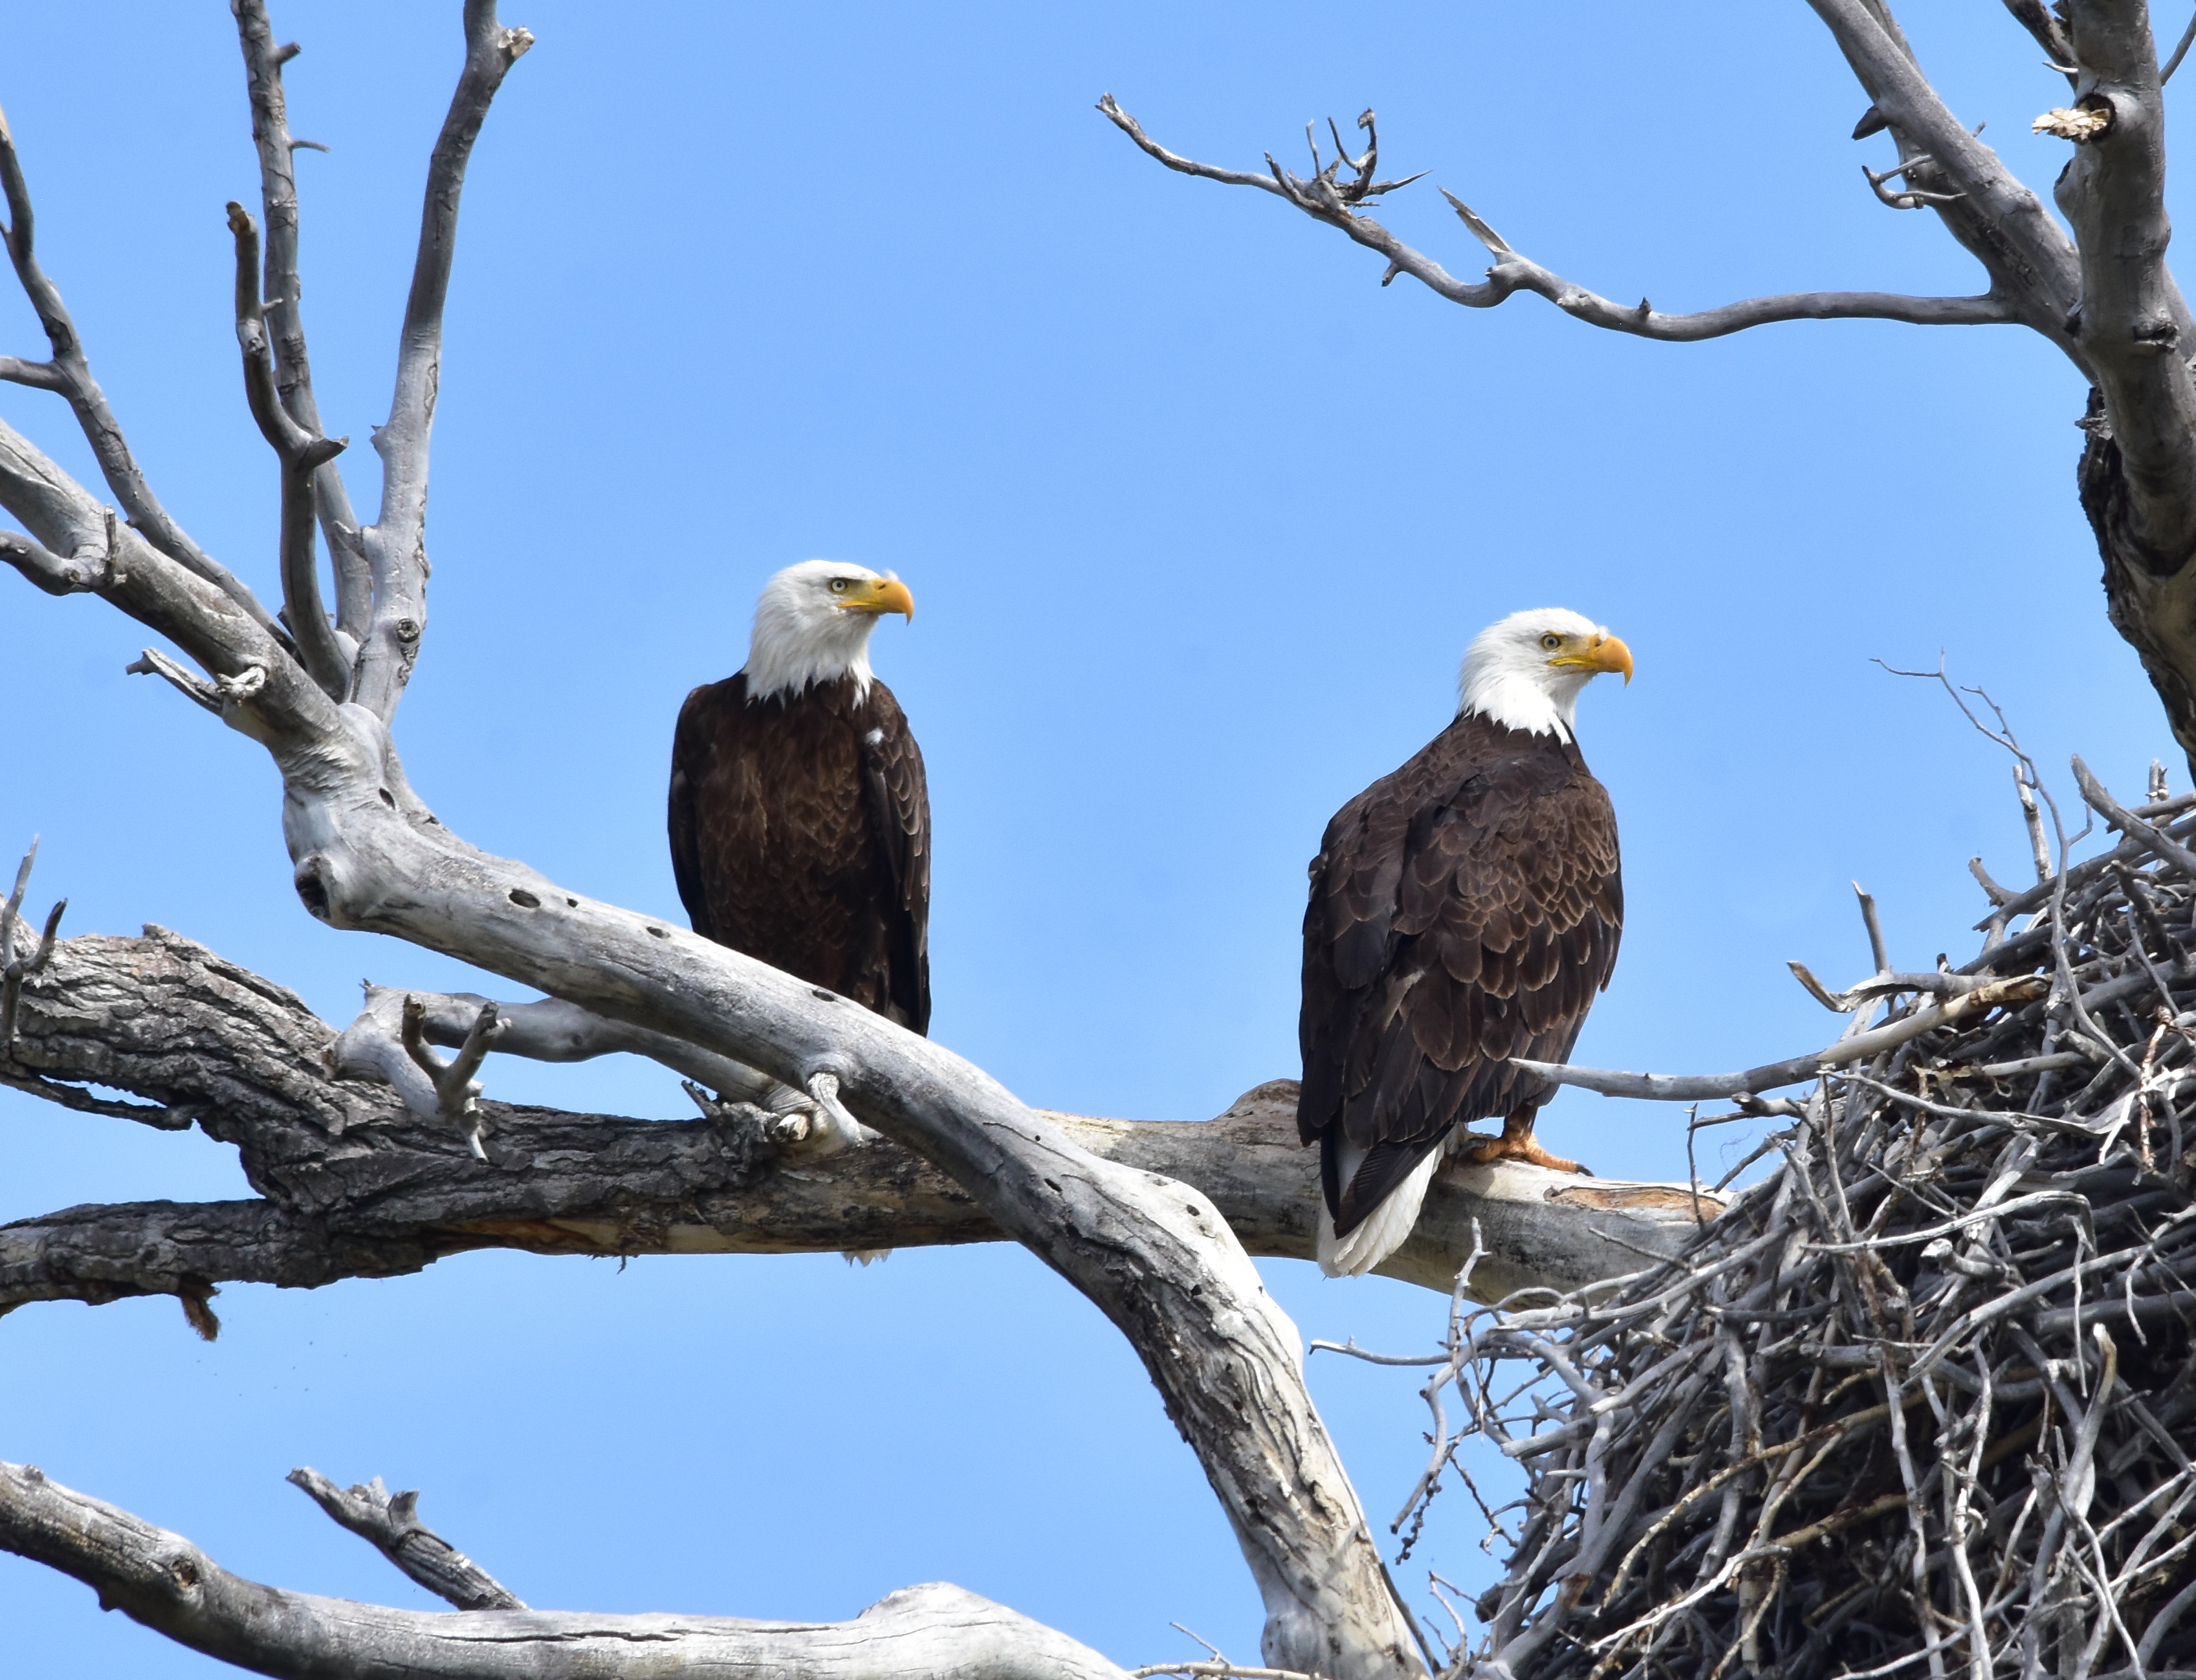 two bald eagles perched on a bare branch